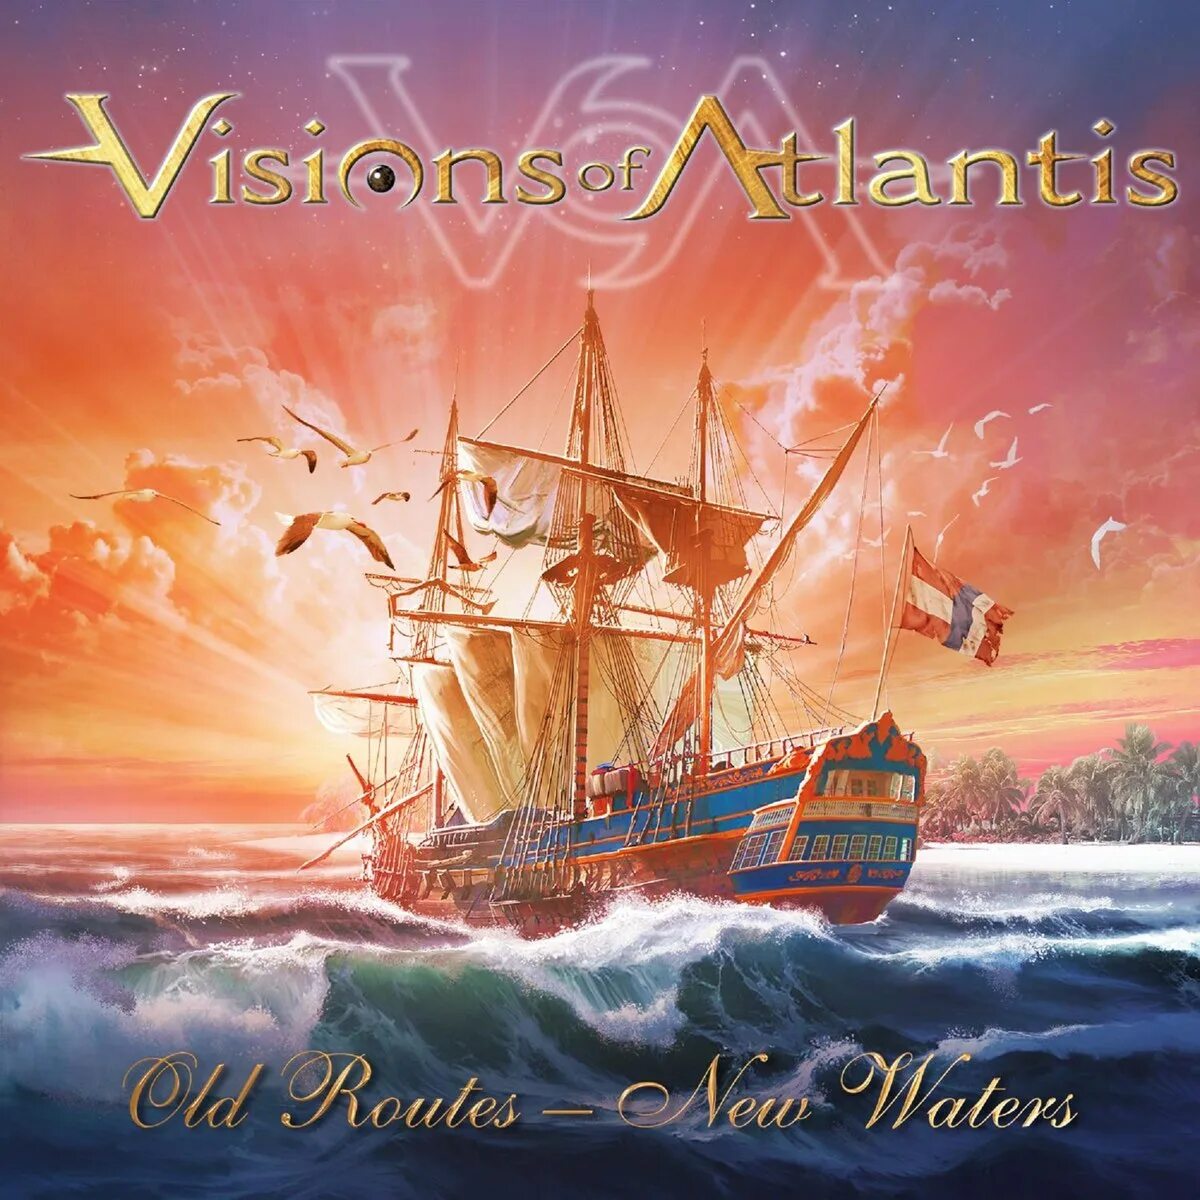 Visions of Atlantis old Routes New Waters. Visions of Atlantis обложка альбома. Visions of Atlantis - old Routes-New Waters (2016). Visions of Atlantis альбомы. Visions of atlantis armada